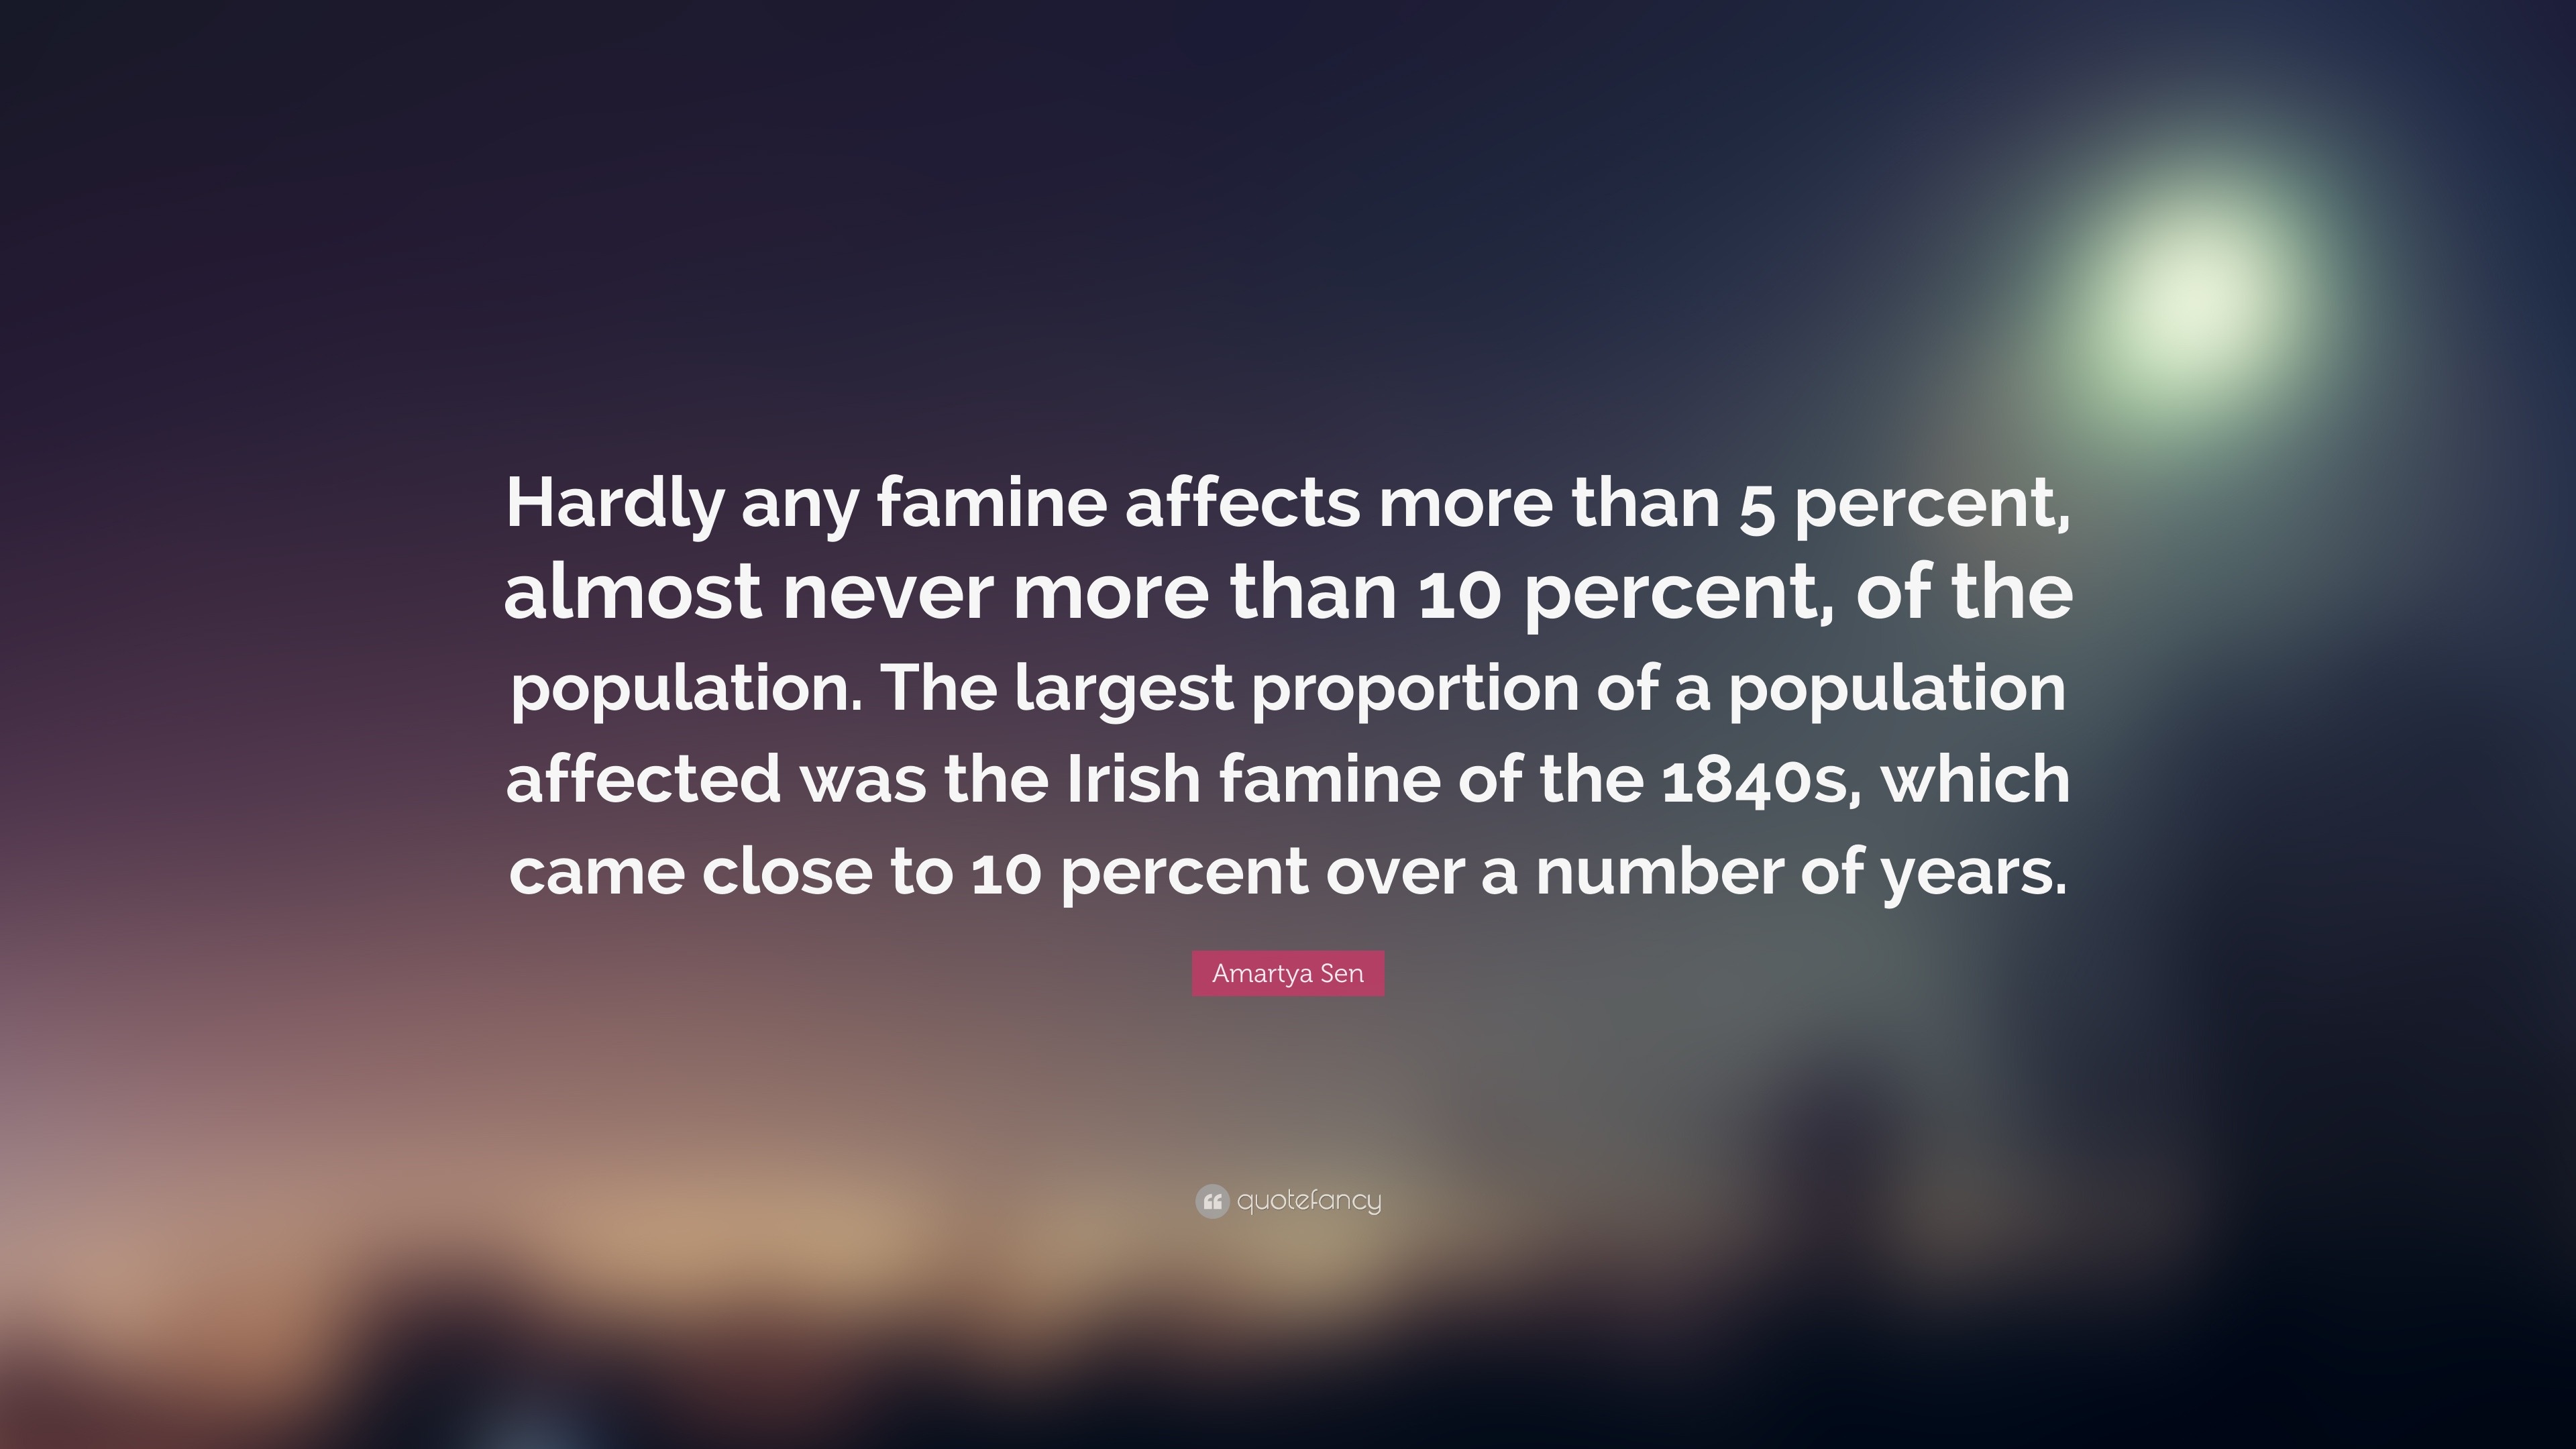 Amartya Sen Quote Hardly Any Famine Affects More Than 5 Percent Images, Photos, Reviews